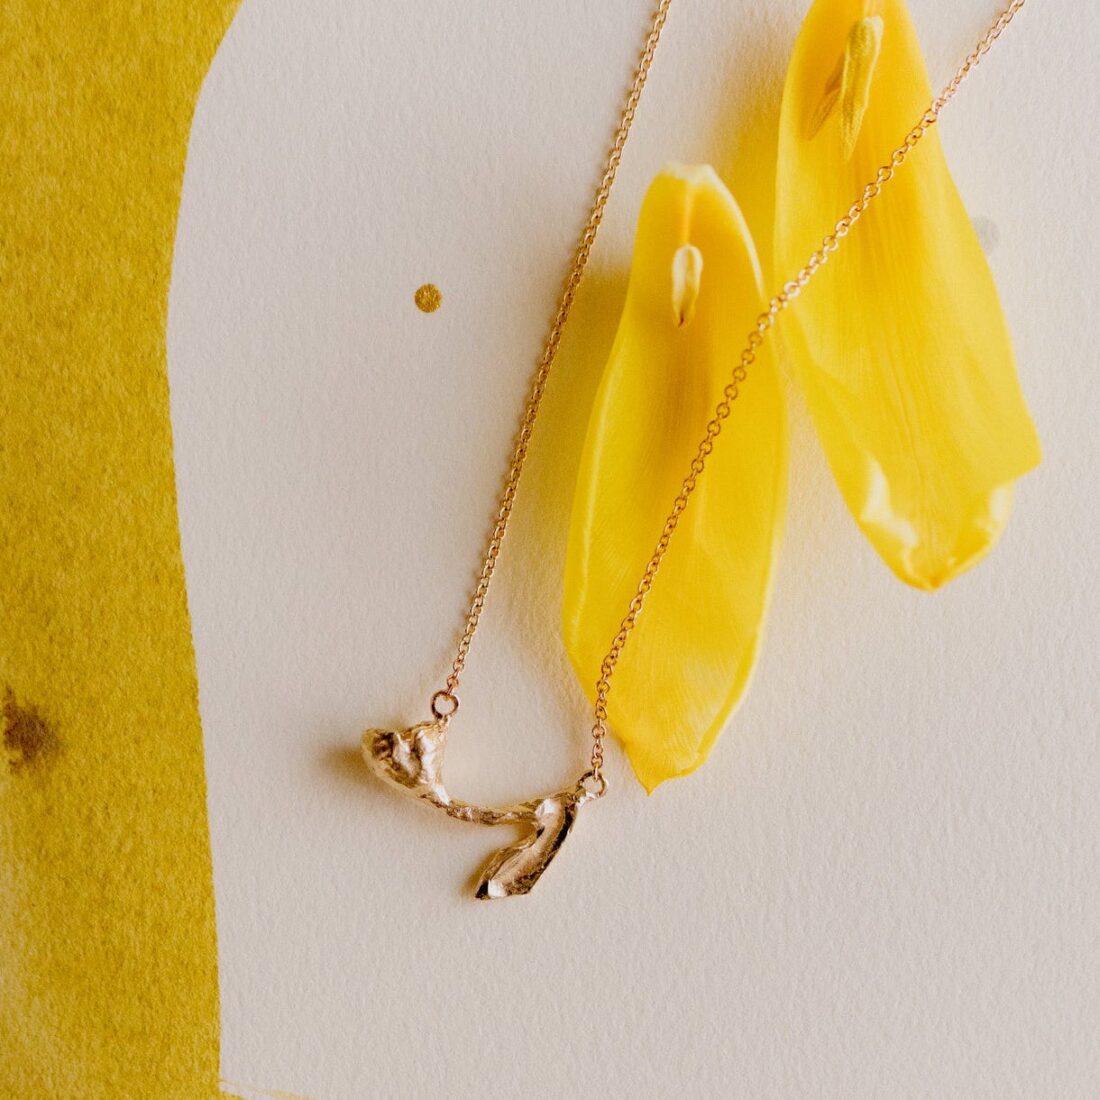 A necklace in gold with a tiny tulip pendant. It is on a background with yellow paint and two tulip petals that are yellow